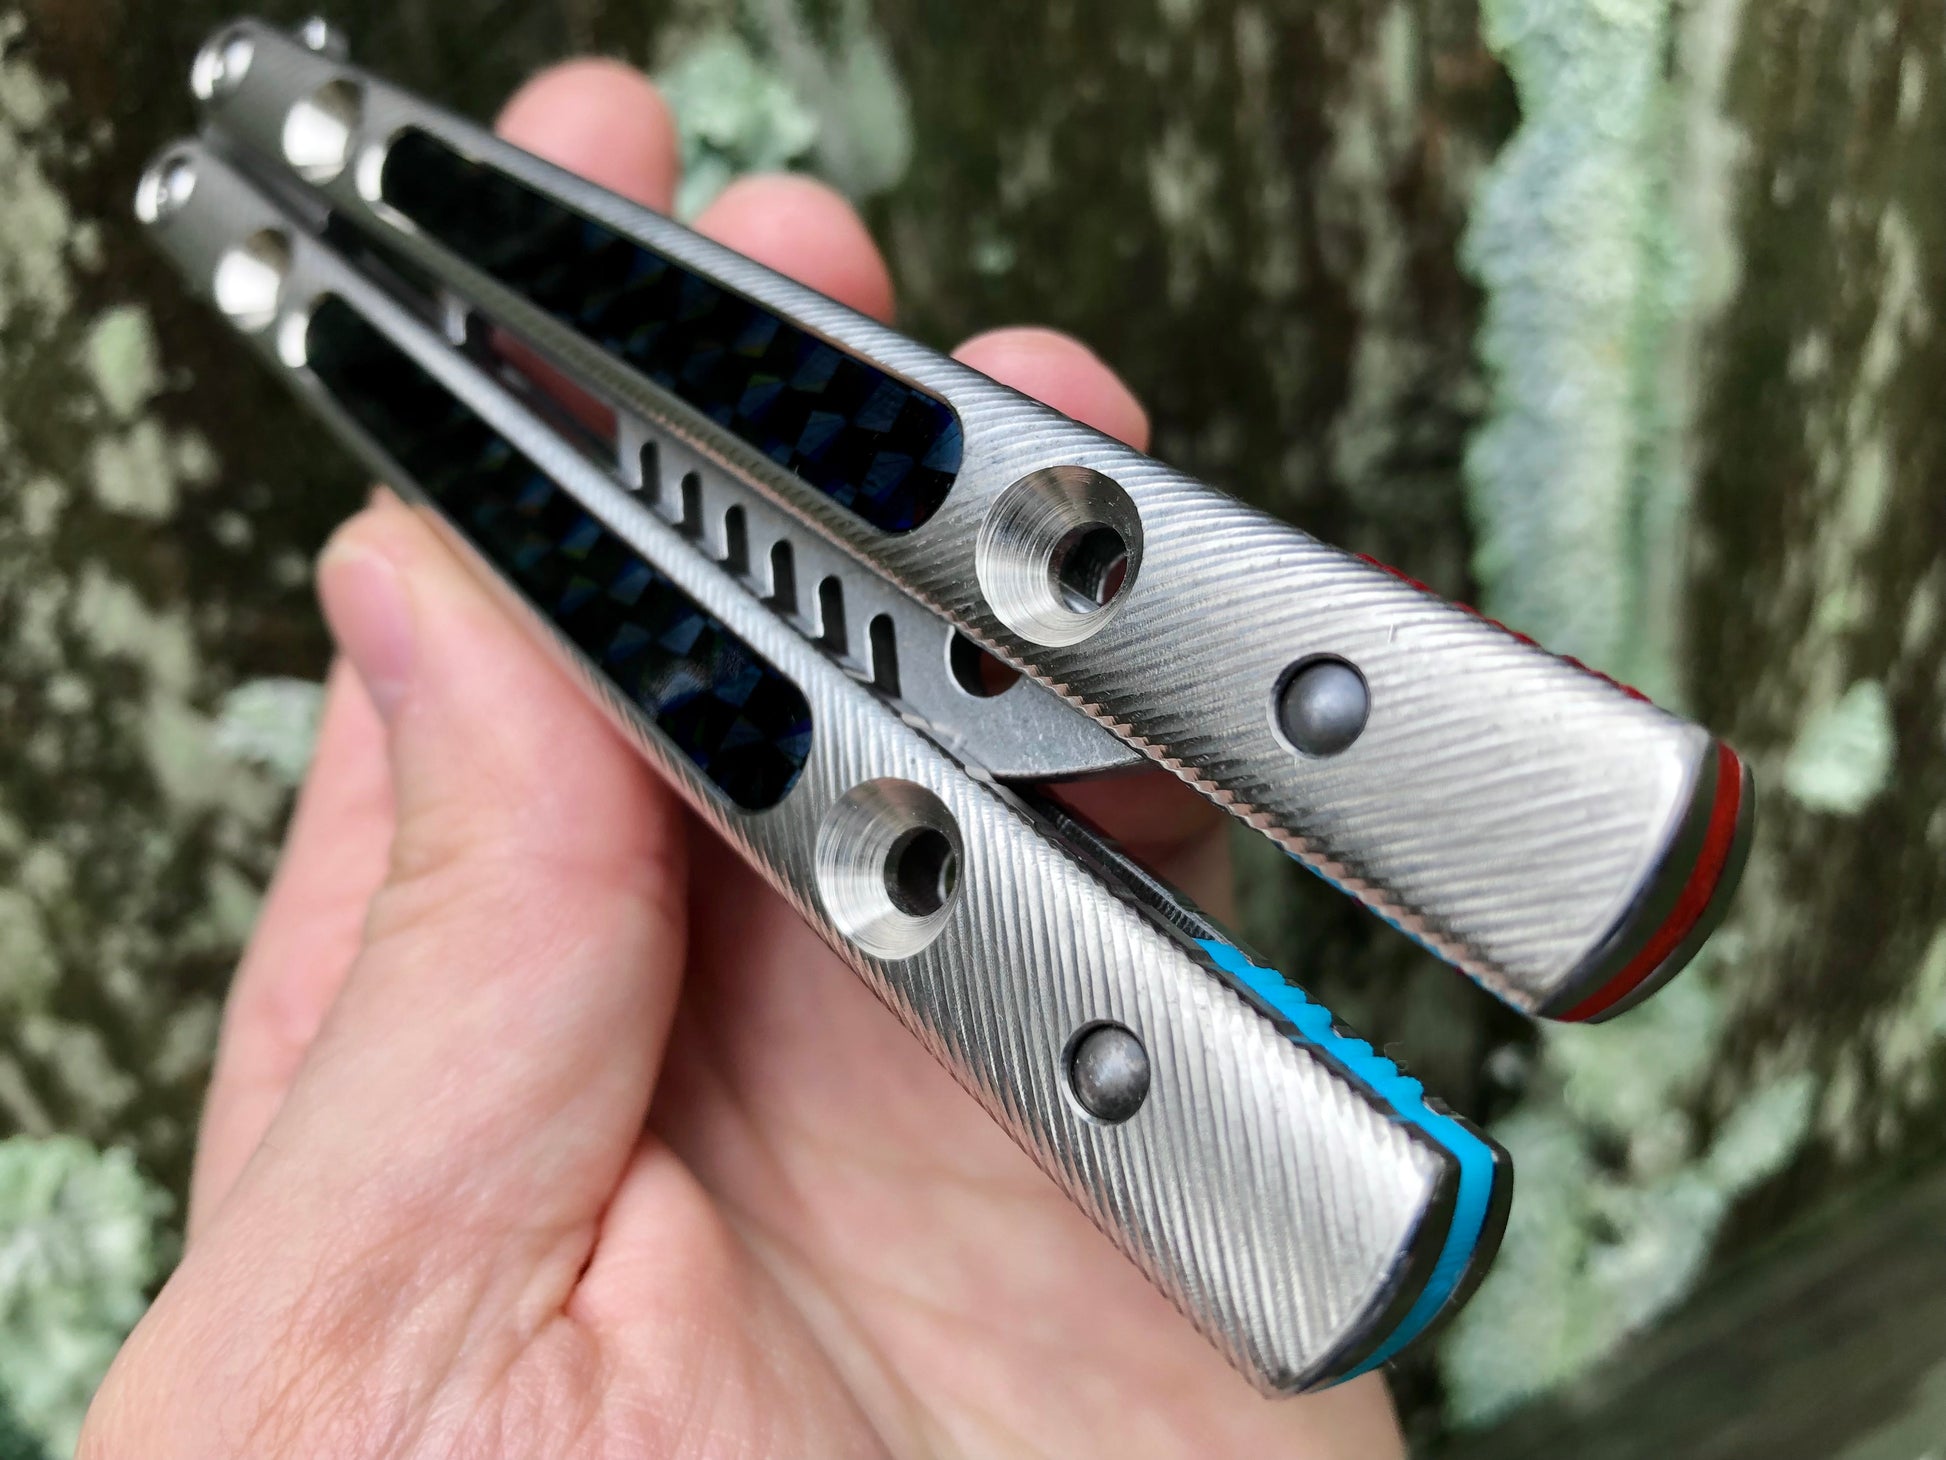 Zippy spacers reduce the handle bias and add positive jimping to your Squiggle Krake, while the inlays add grip and comfort. Individually, both spacers and the inlays eliminate ring and are designed to fit the titanium Squiggle handles for the Squid Industries Krake Raken balisong.